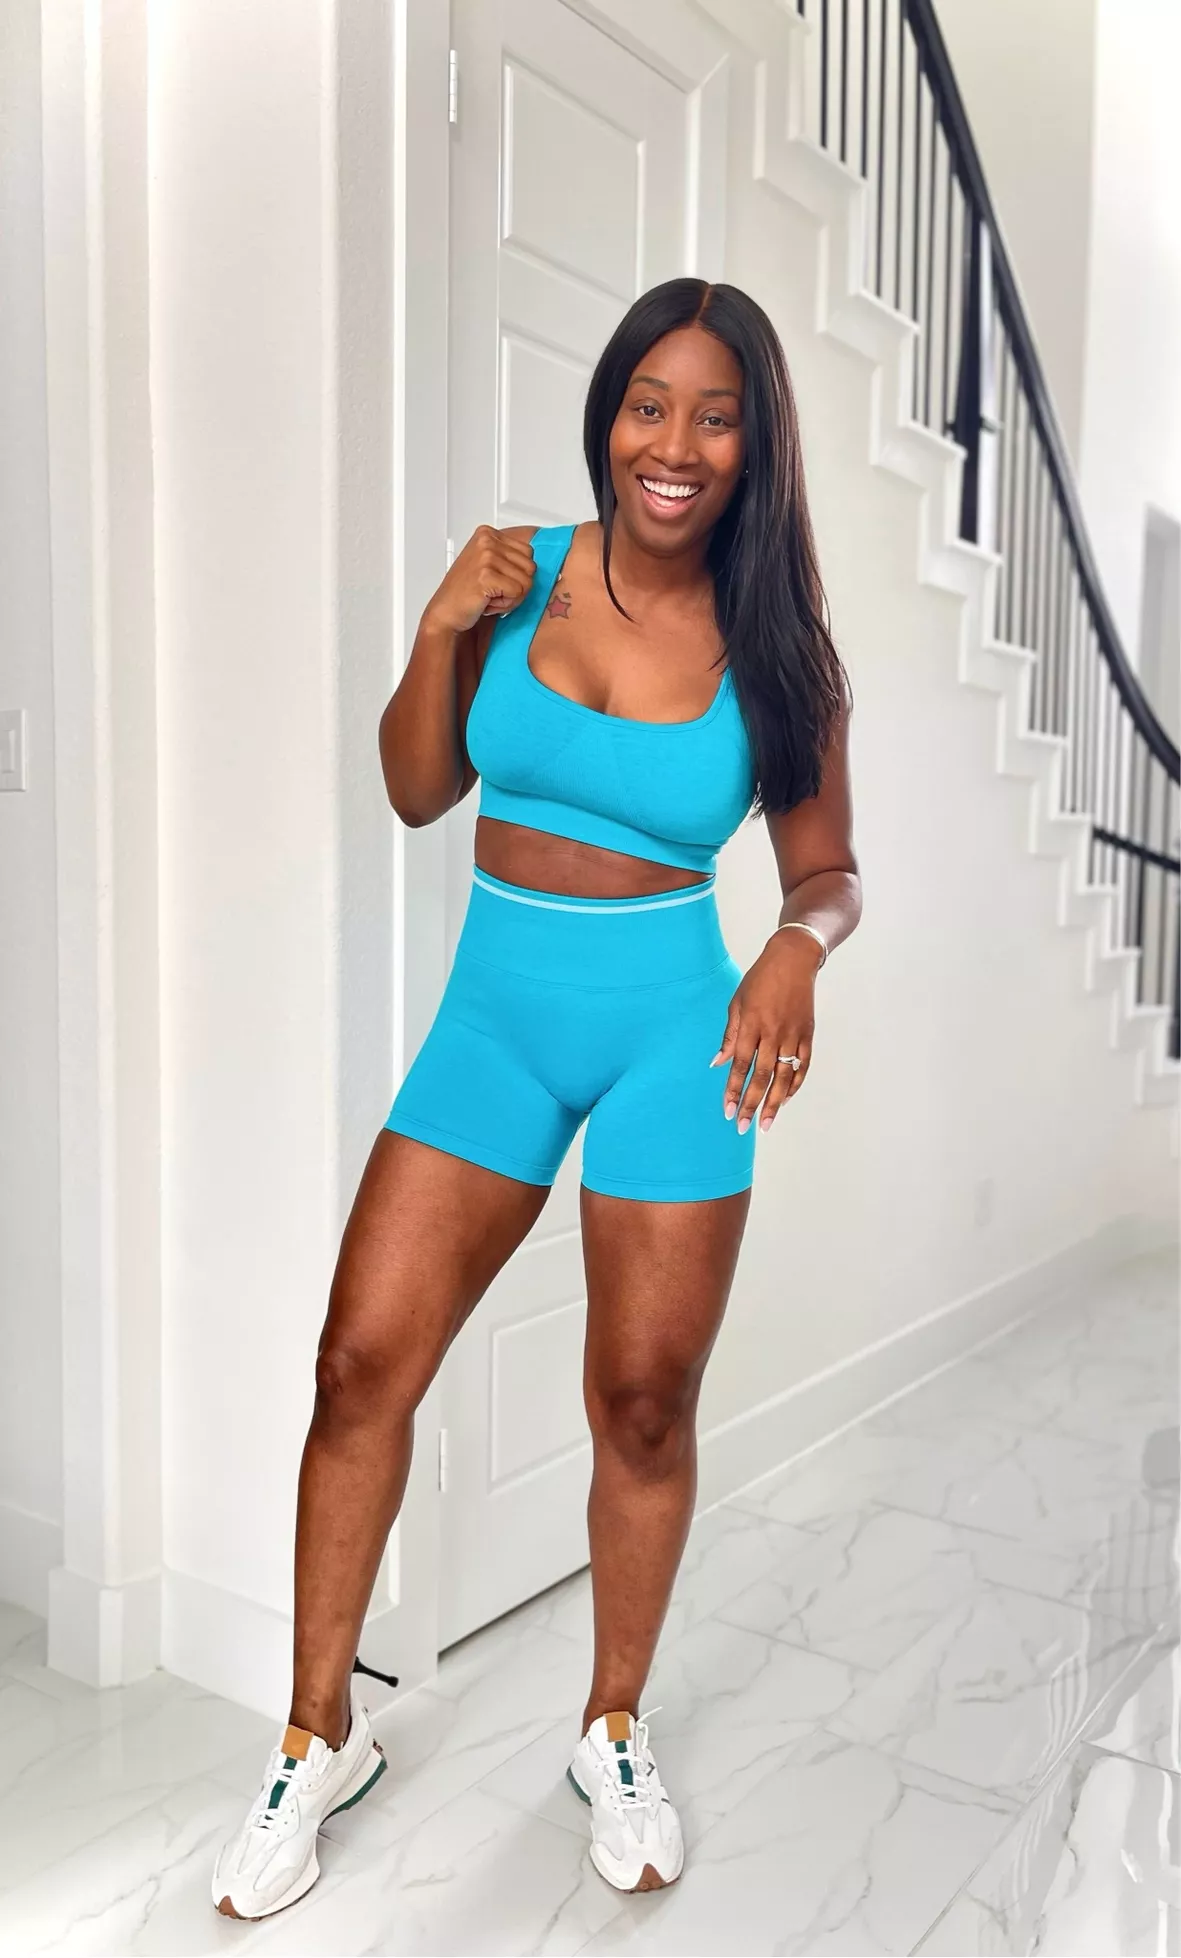  OQQ Workout Outfits for Women 2 Piece Ribbed Exercise